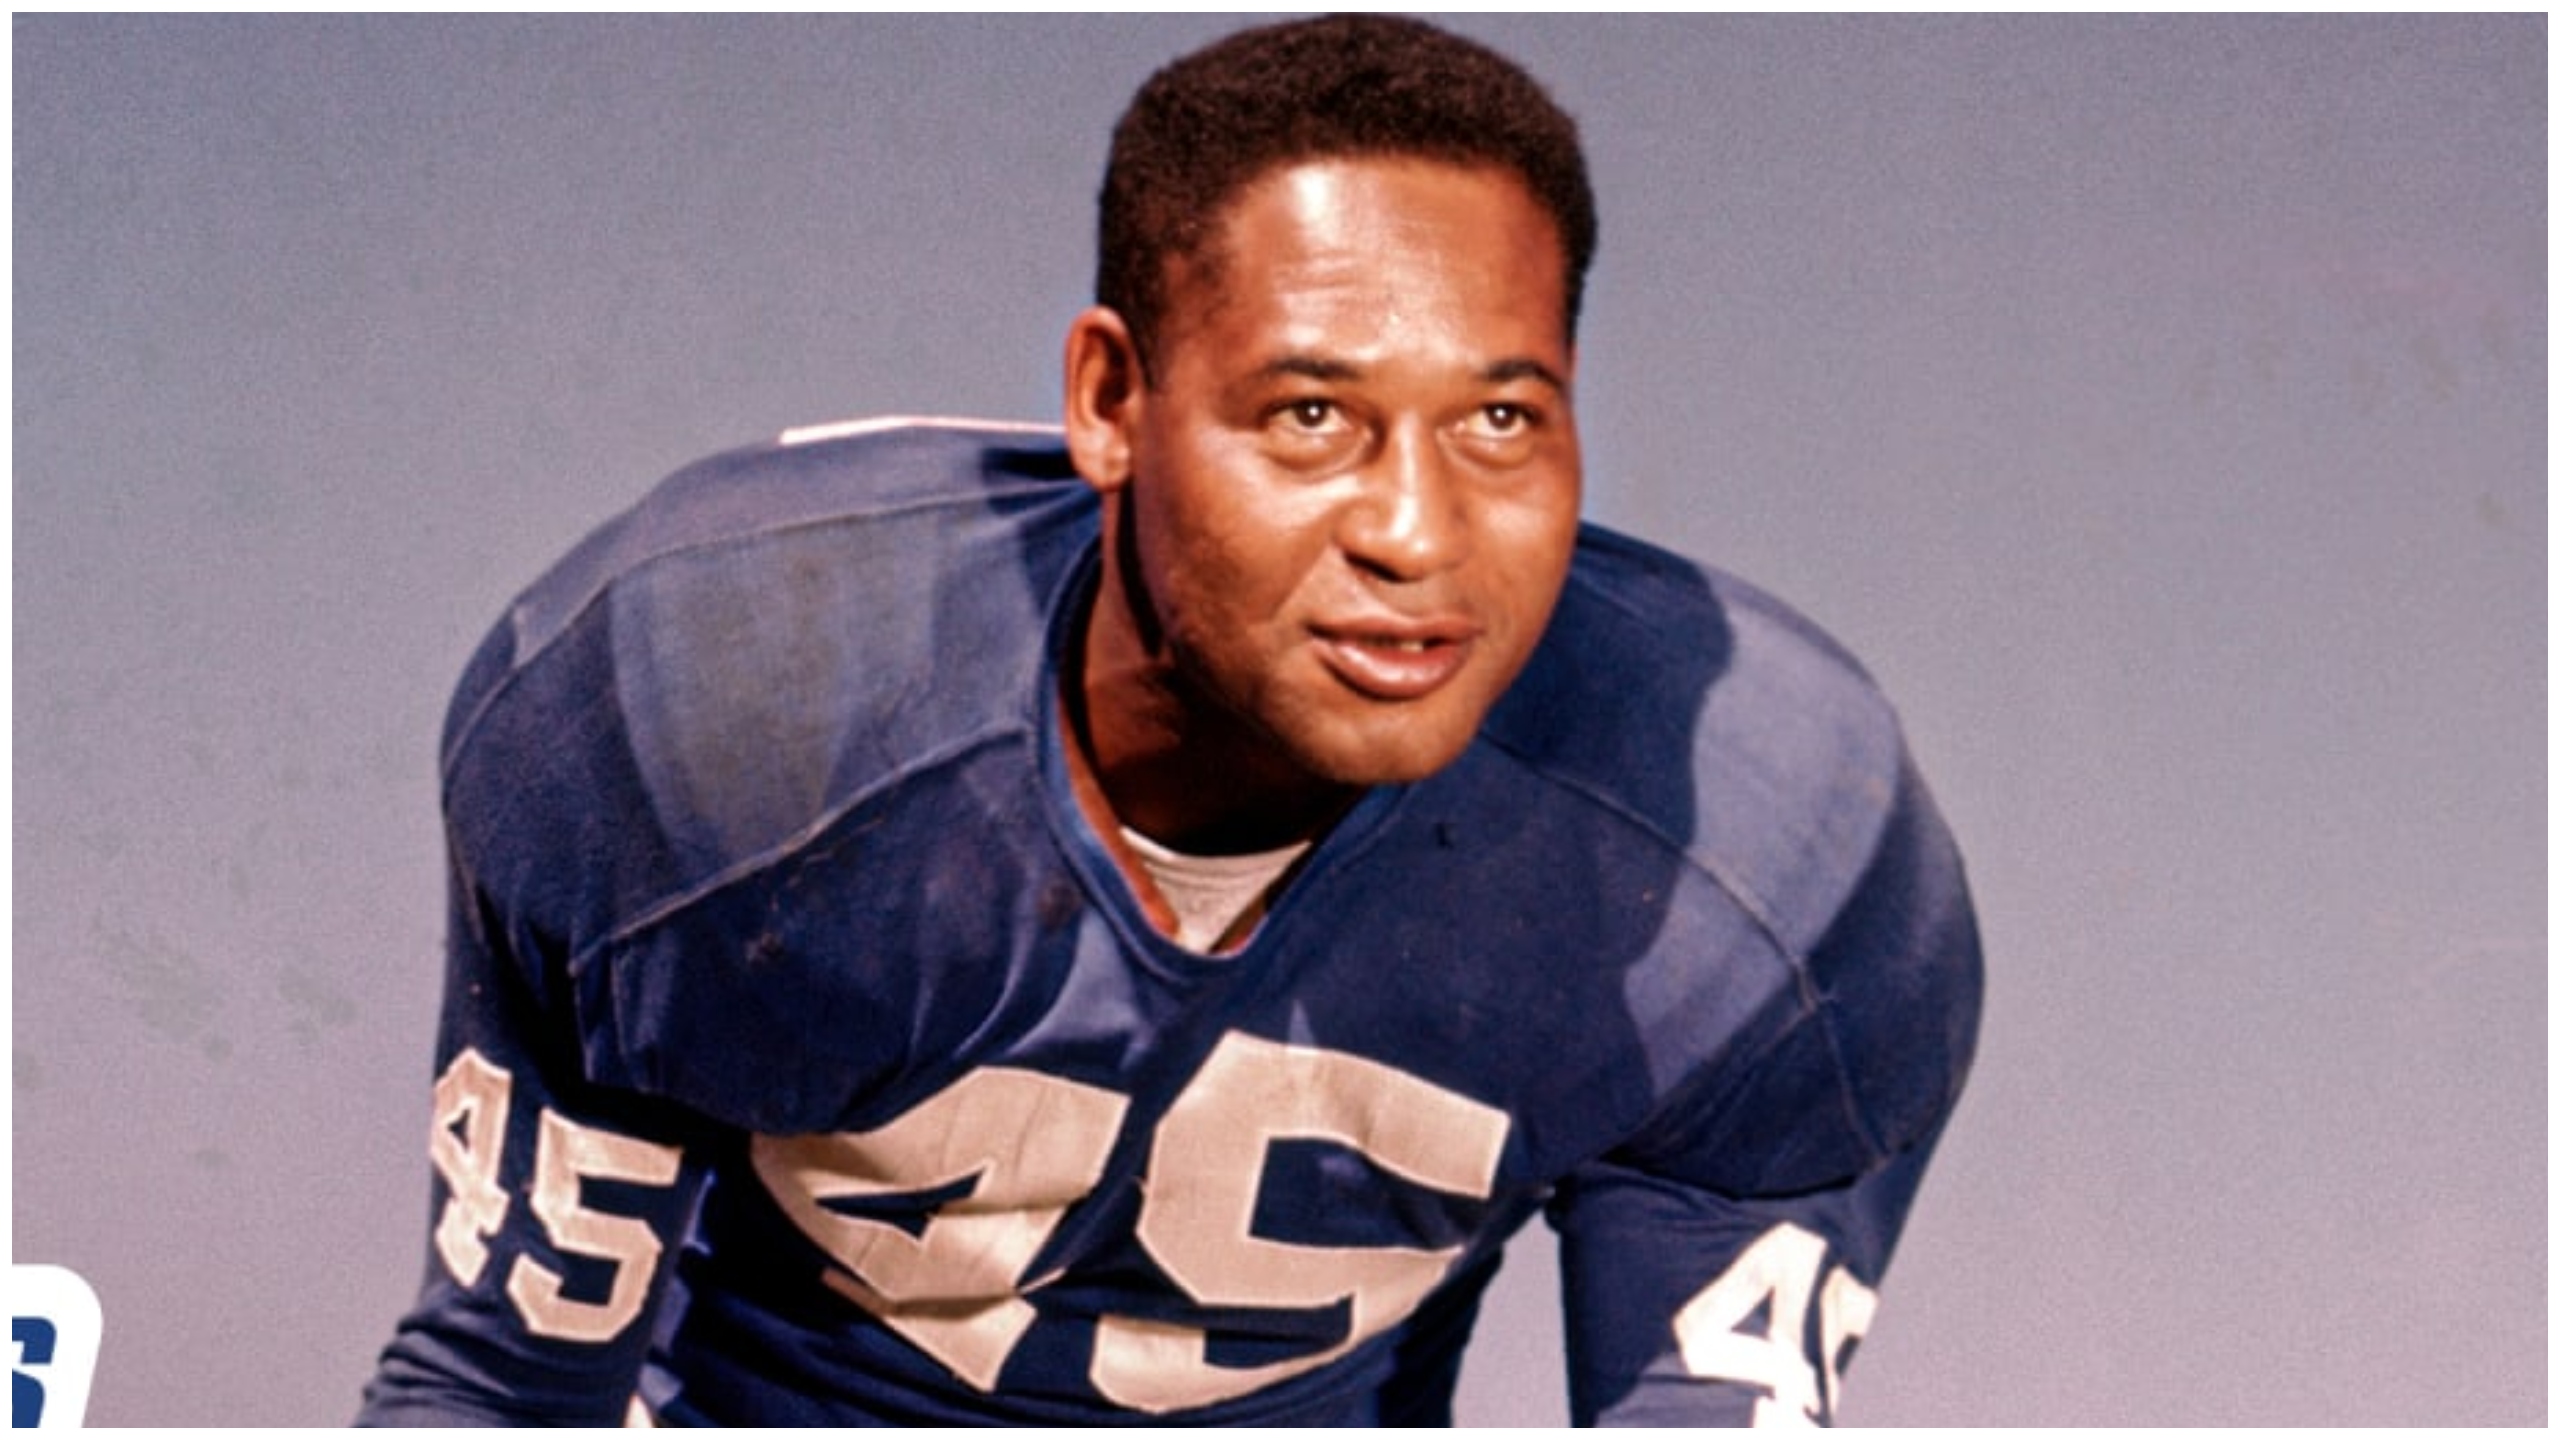 Meet Emlen Lewis Tunnell The Historic Sportsman Who Was The First African-American To Play For The New York Giants